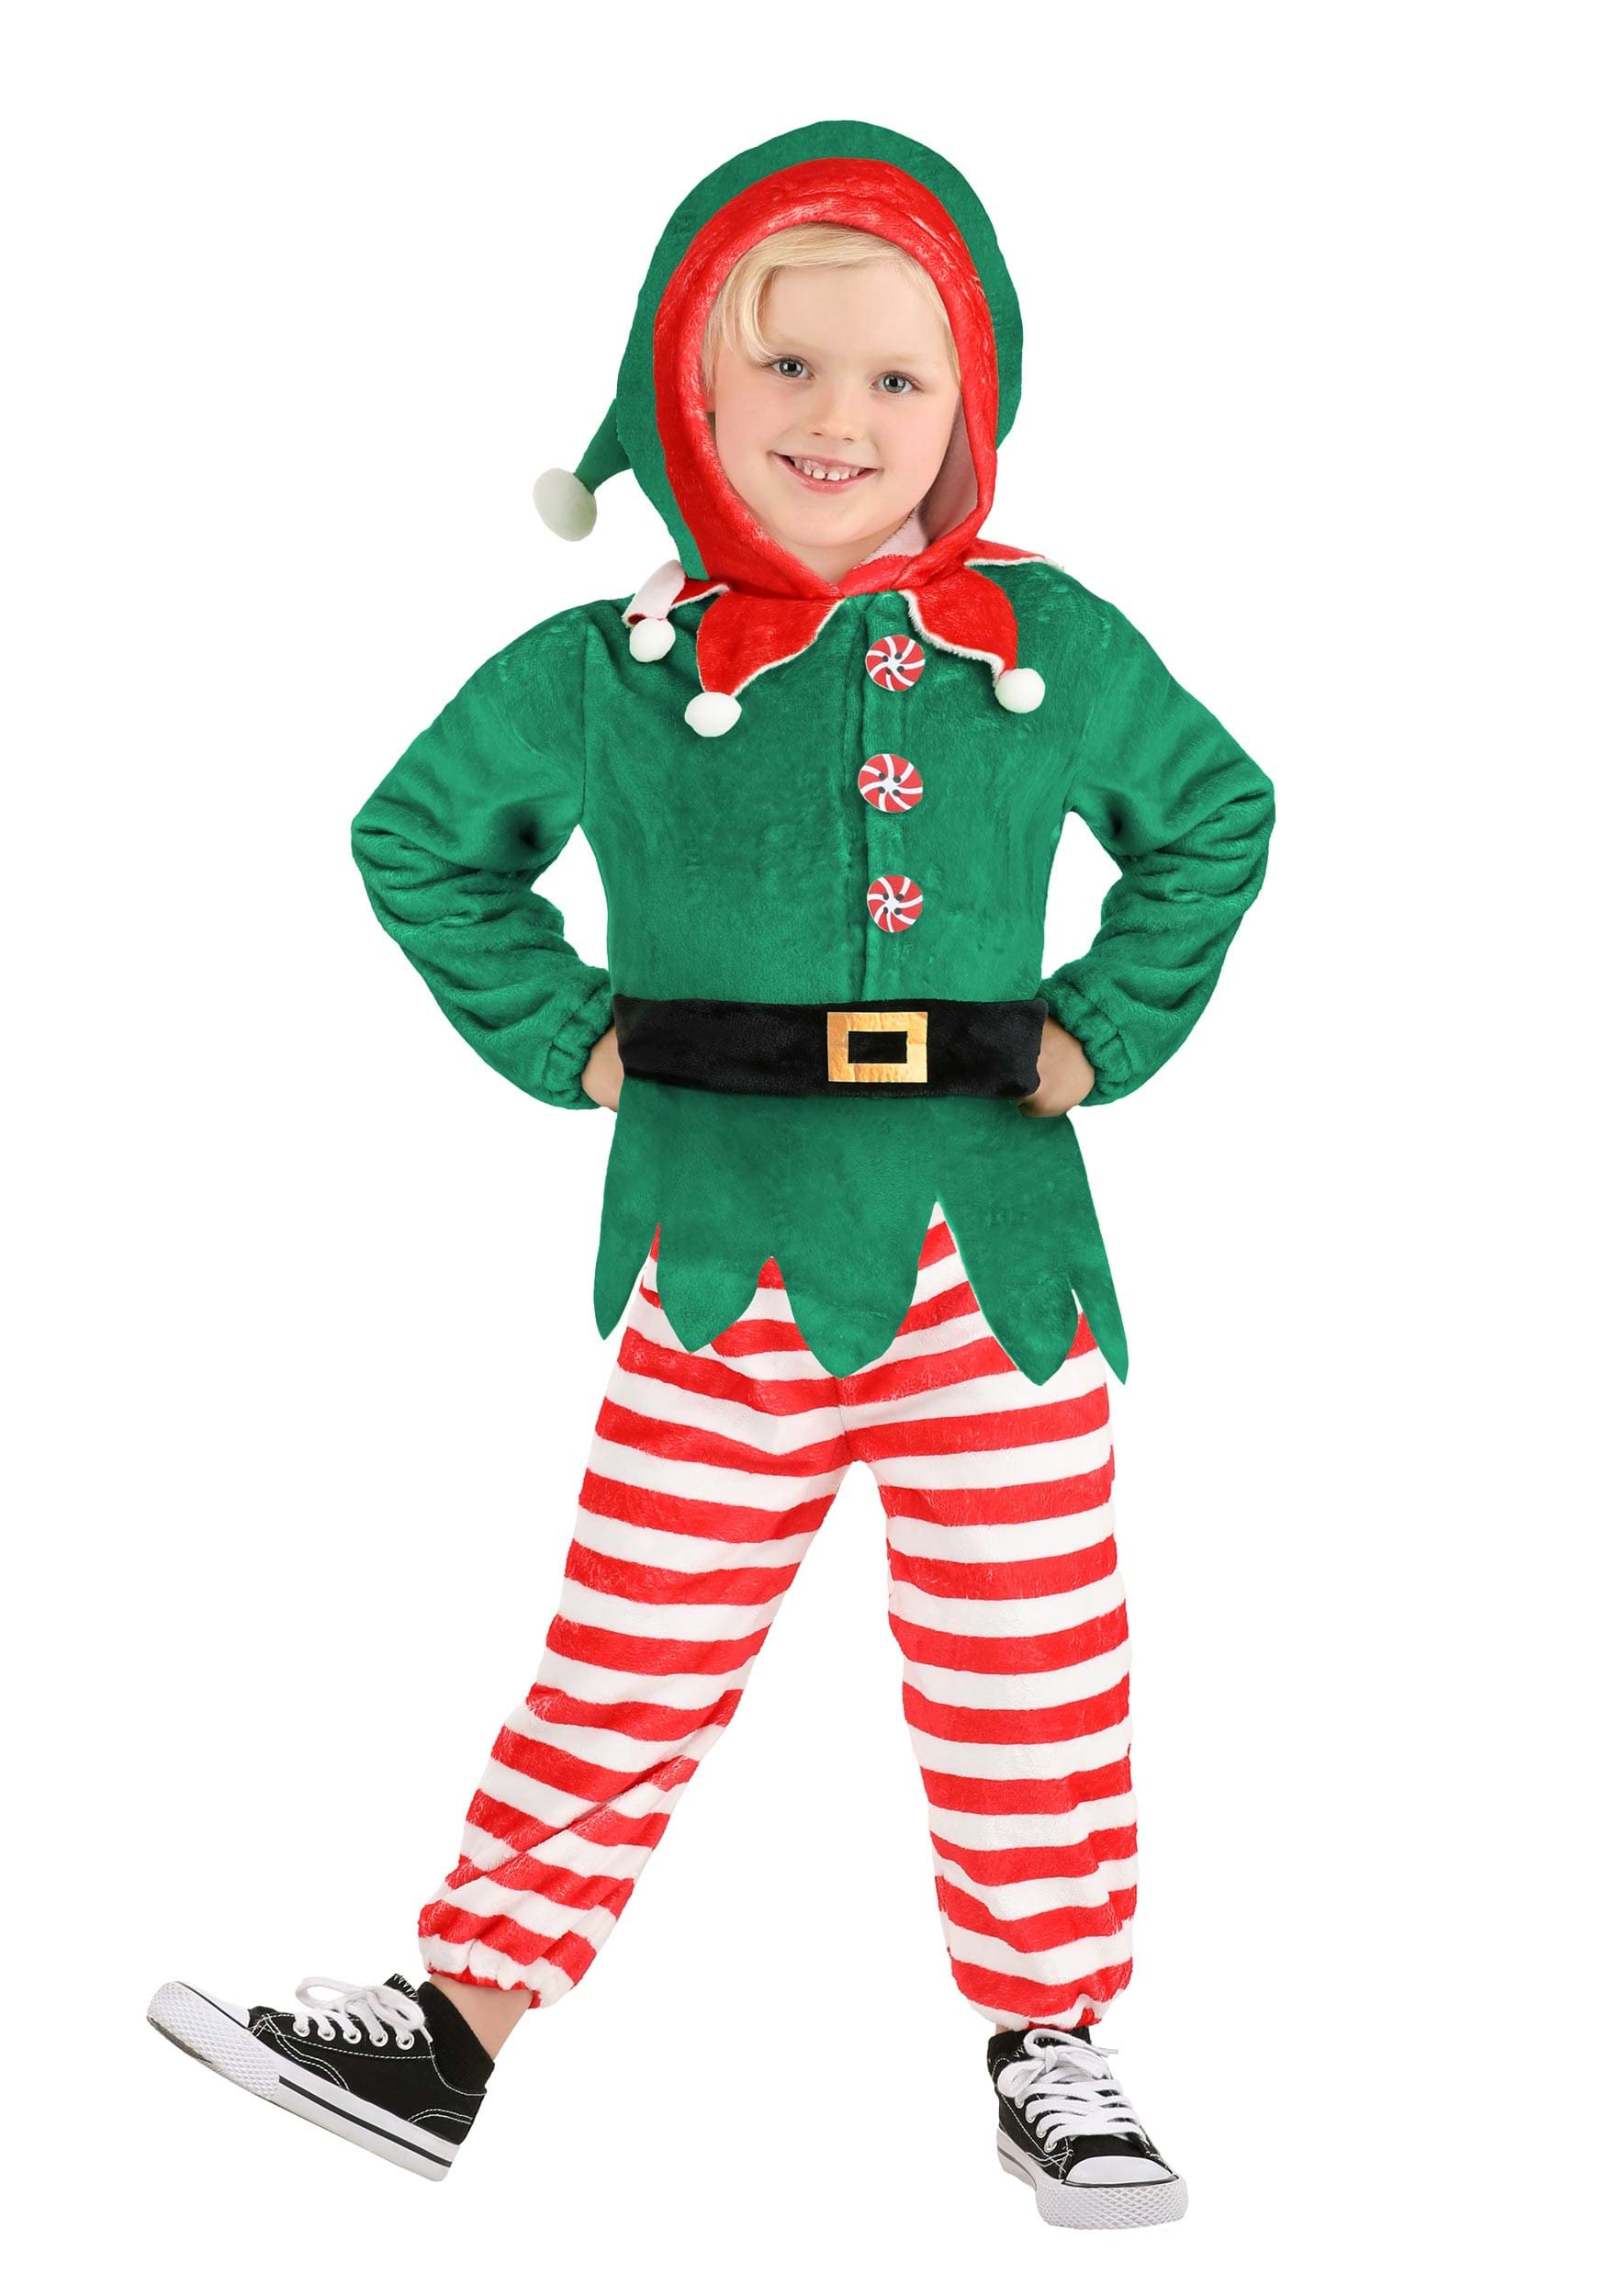 Photos - Fancy Dress ELF FUN Costumes  Jumpsuit Toddler Costume Green/Red/White FUN3427T 